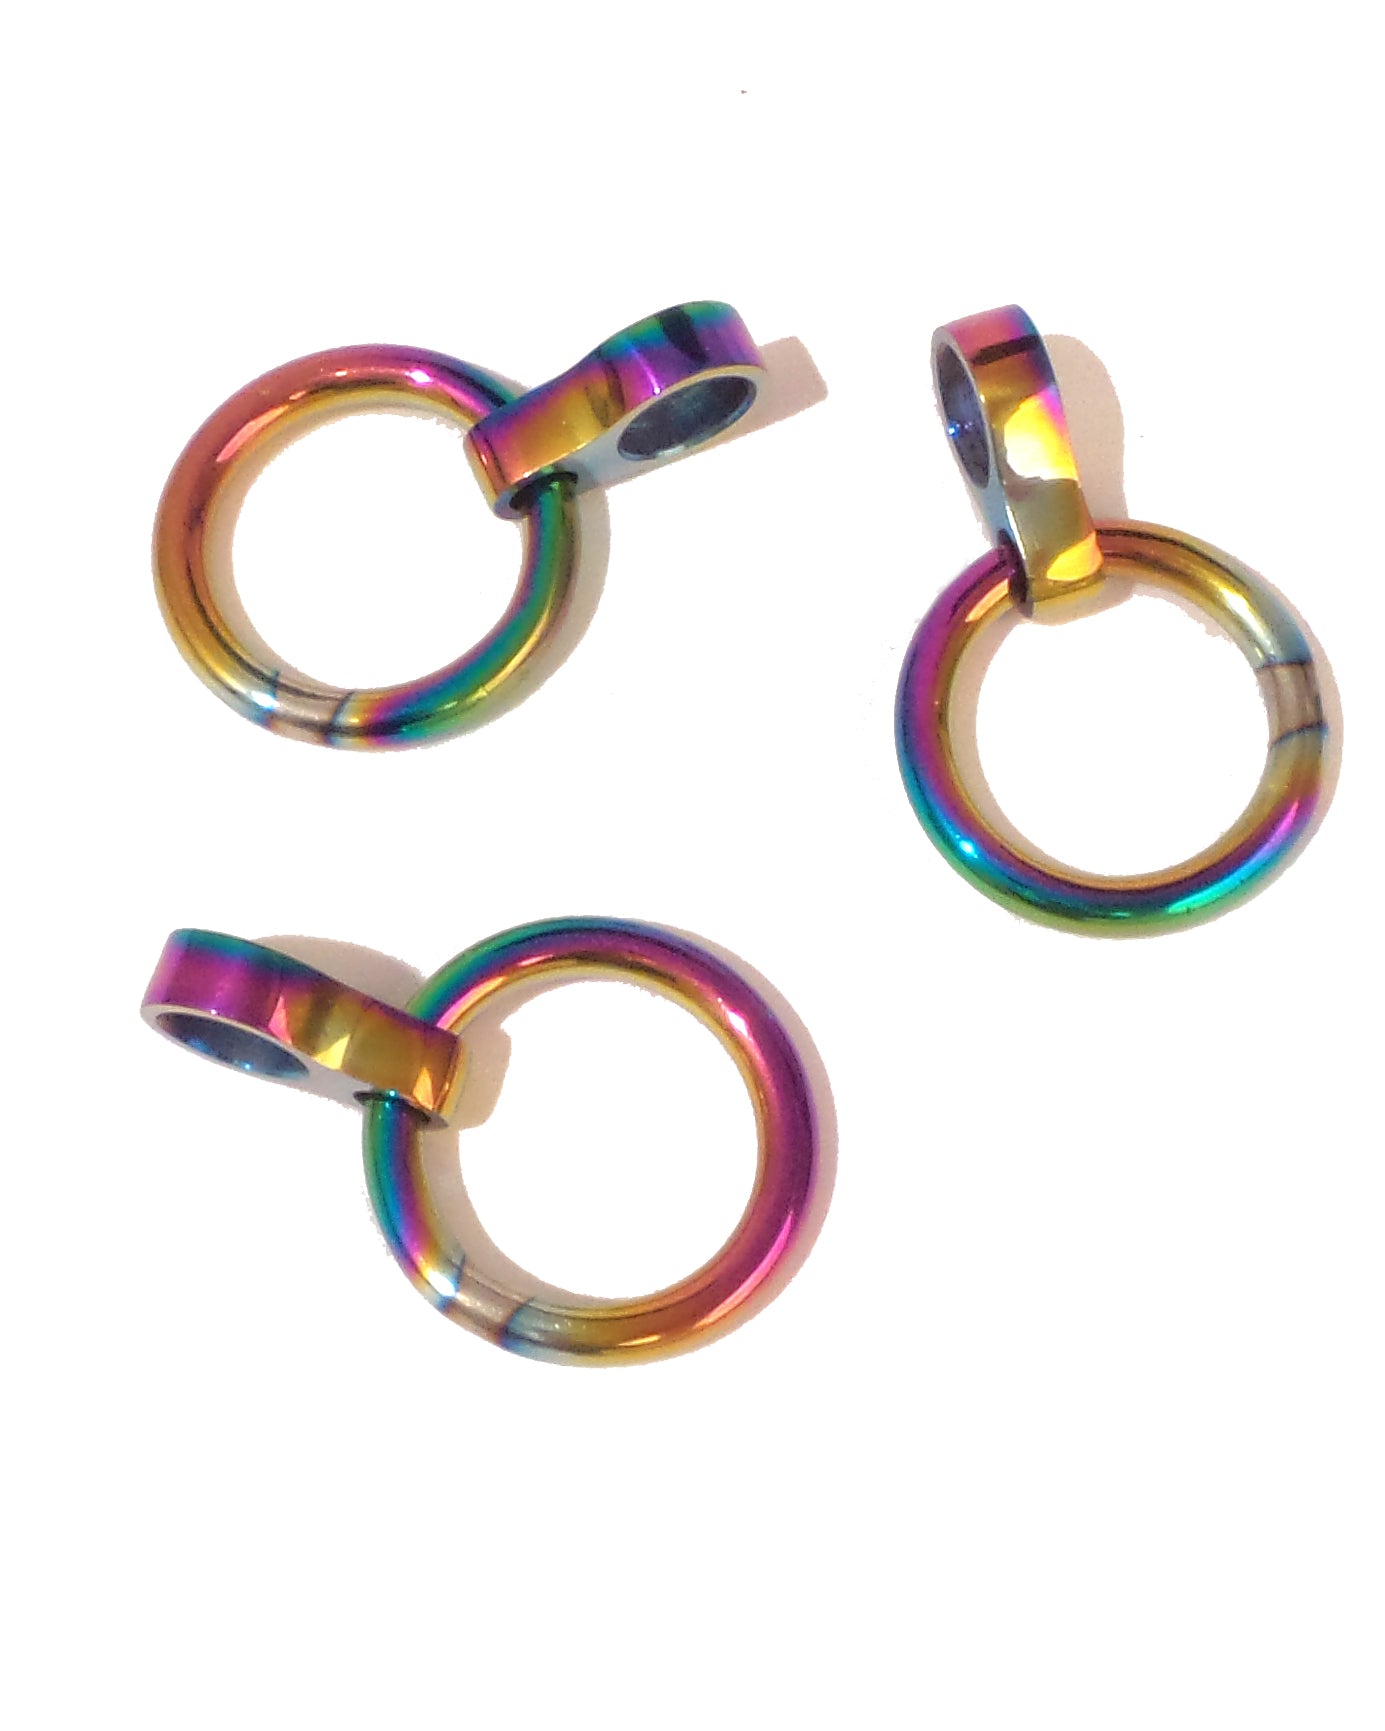 Rainbow Optional Detachable Accessory Ring Thin for 6mm and 8mm Collars, Cuffs, and Legirons